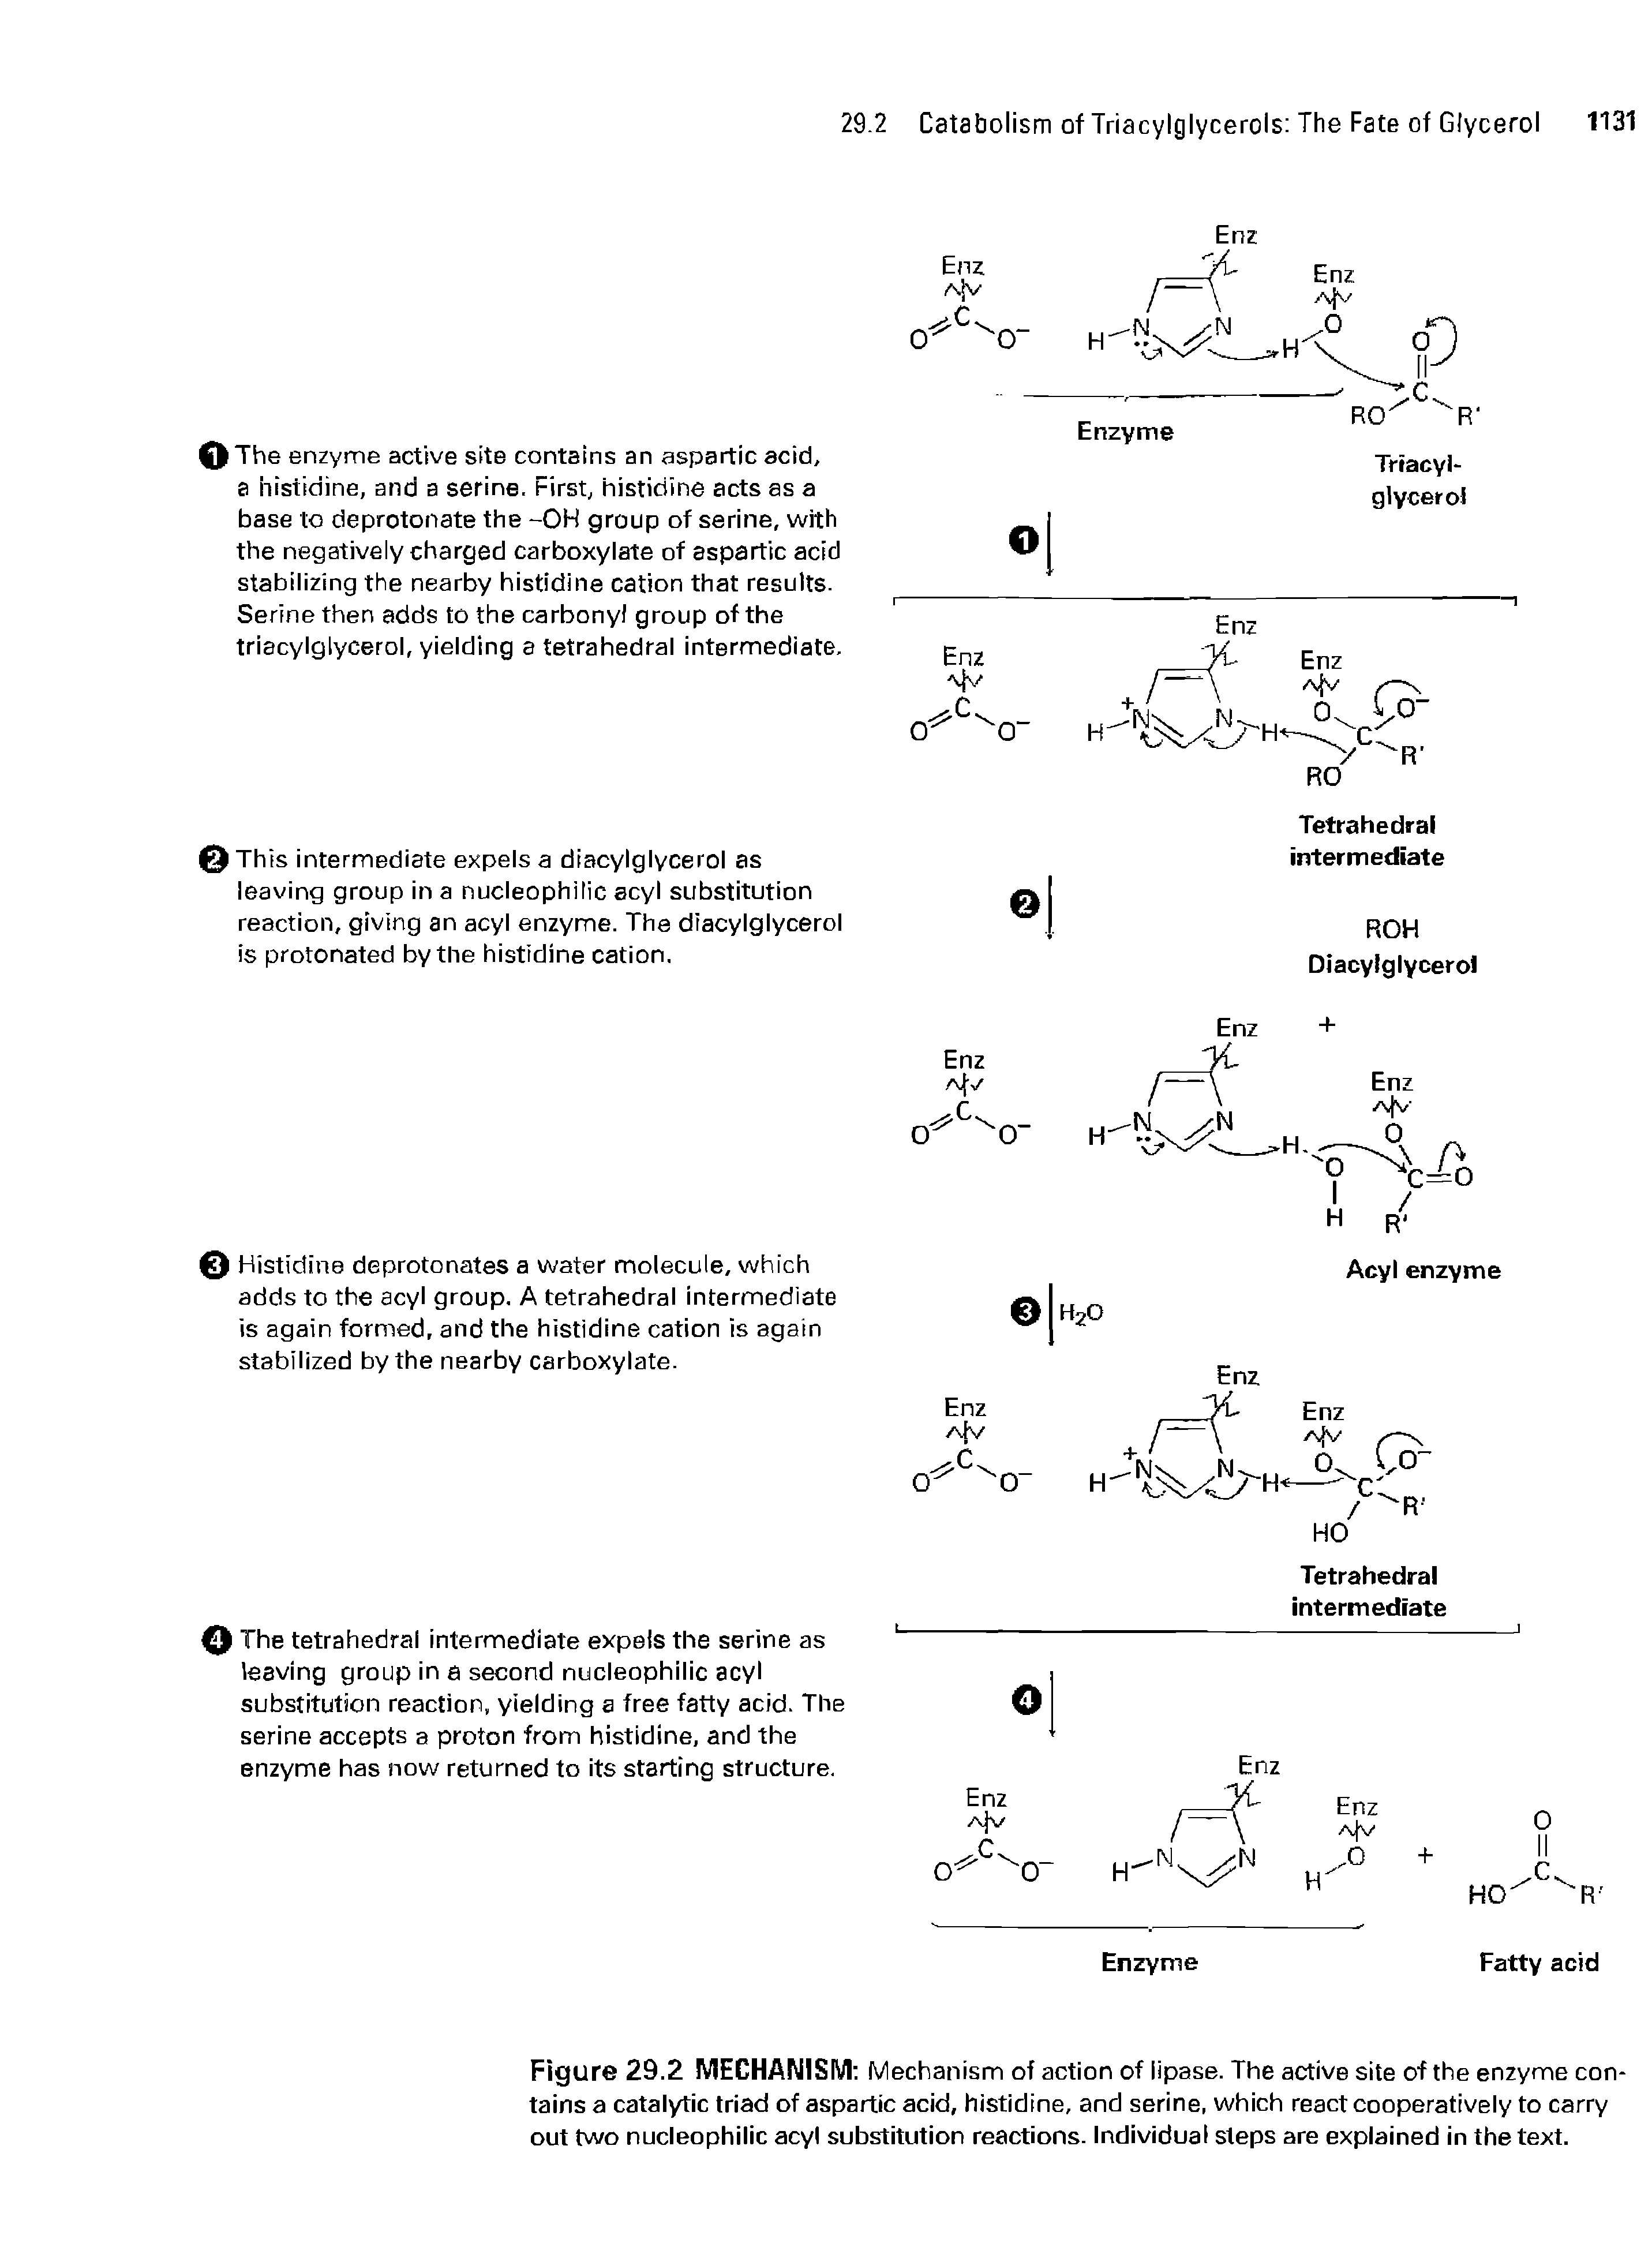 Figure 29.2 MECHANISM Mechanism of action of lipase. The active site of the enzyme contains a catalytic triad of aspartic acid, histidine, and serine, which react cooperatively to carry out two nucleophilic acyl substitution reactions. Individual steps are explained in the text.